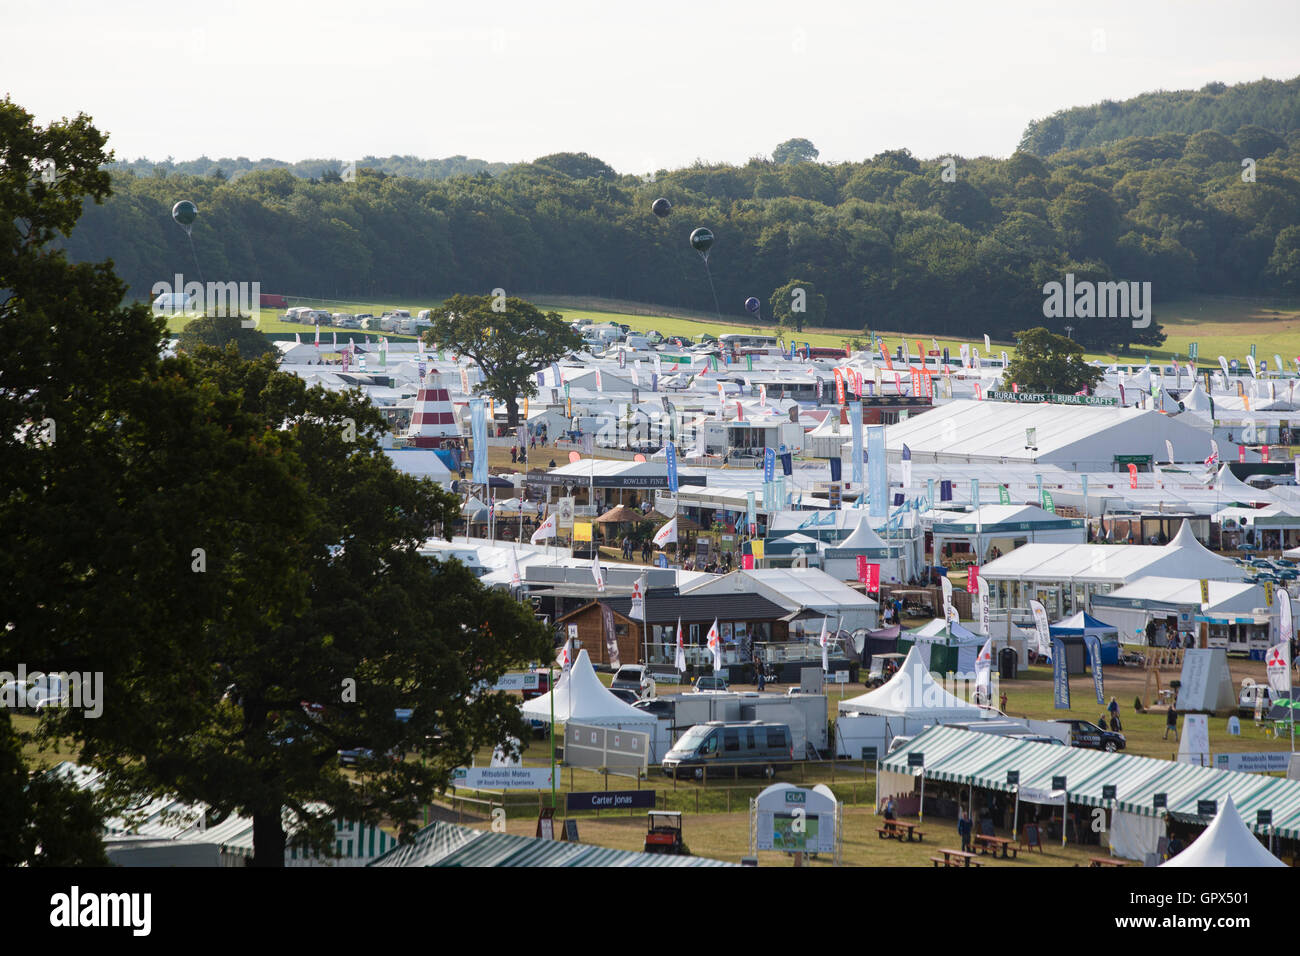 General view over the Game Fair at Harewood House, Leeds. Stock Photo